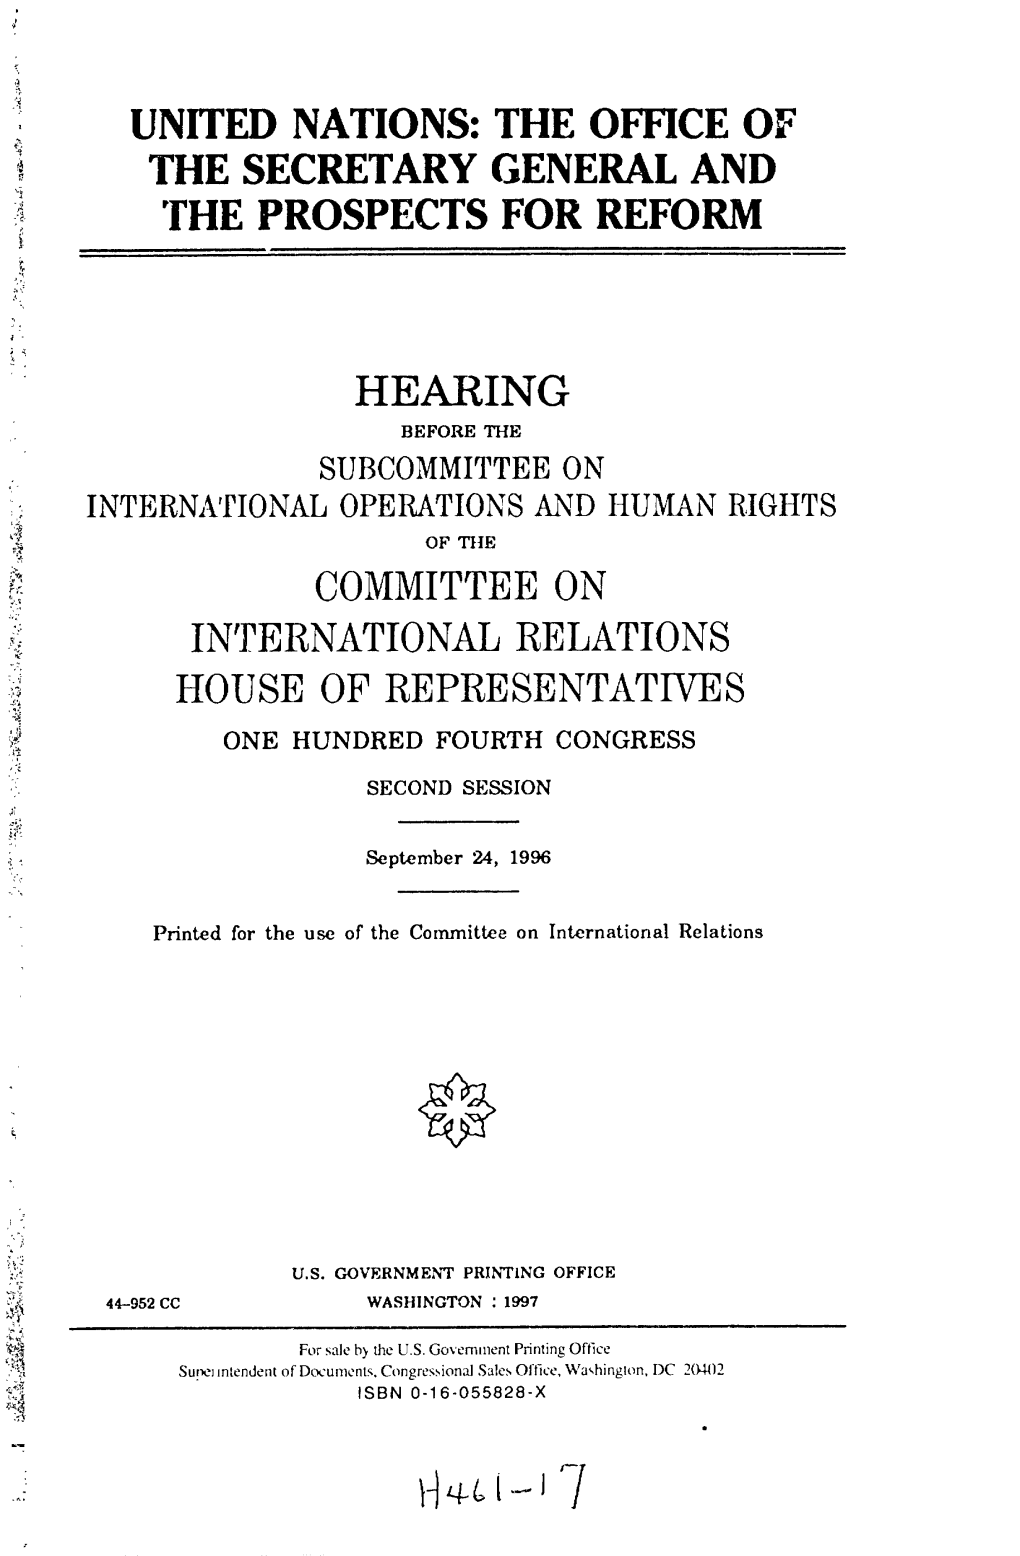 United Nations: the Office of the Secretary General and the Prospects for Reform